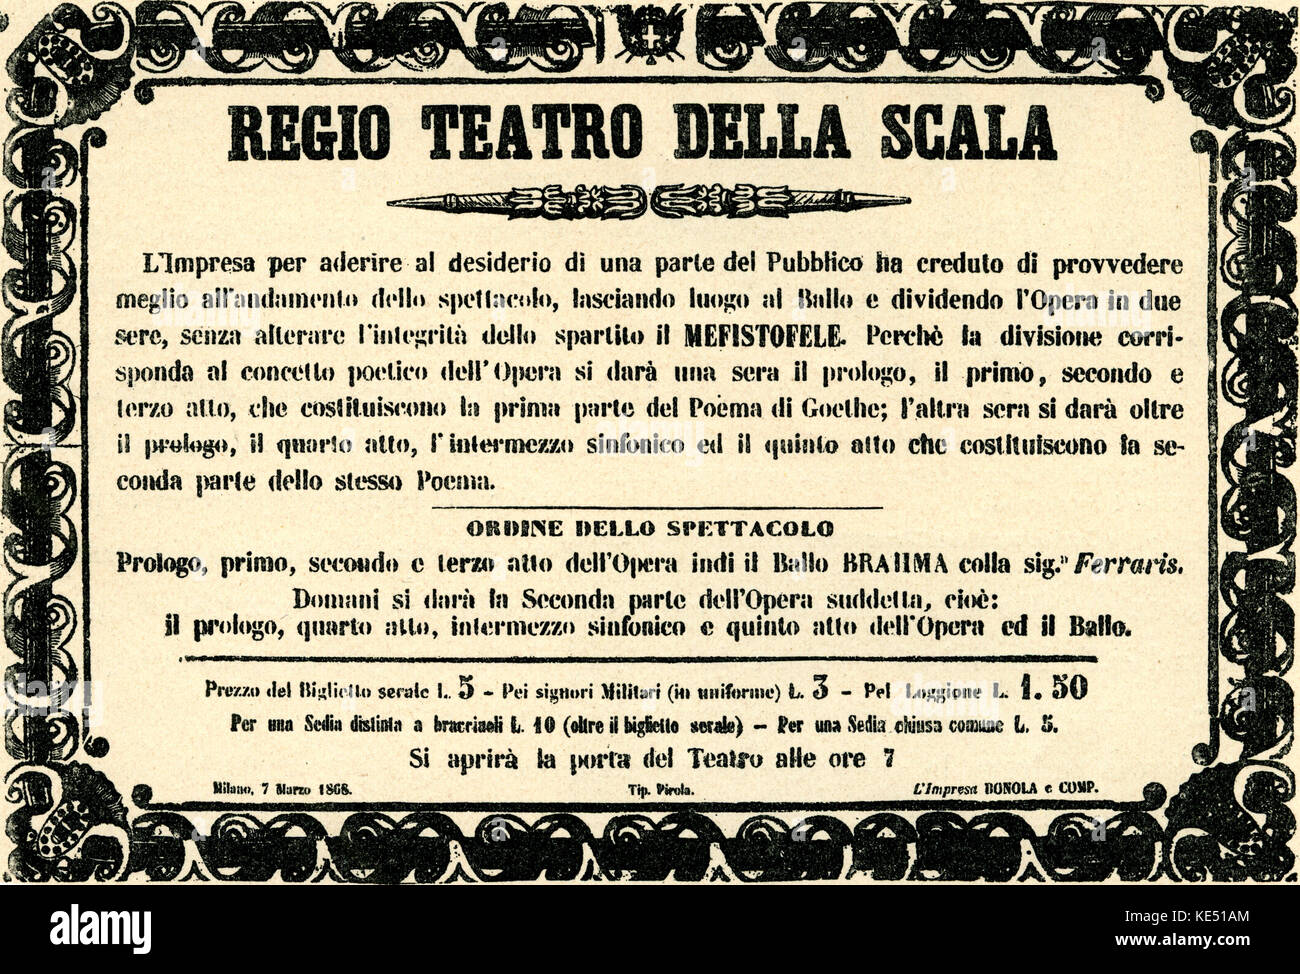 Arrigo Boito 's opera 'Mefistofele' - advertisement for the first performance at the Teatro alla Scala, Milan, Italy, which opened in March 1868.  Italian poet and opera composer, 24 February 1842 - 10 June 1918. Stock Photo